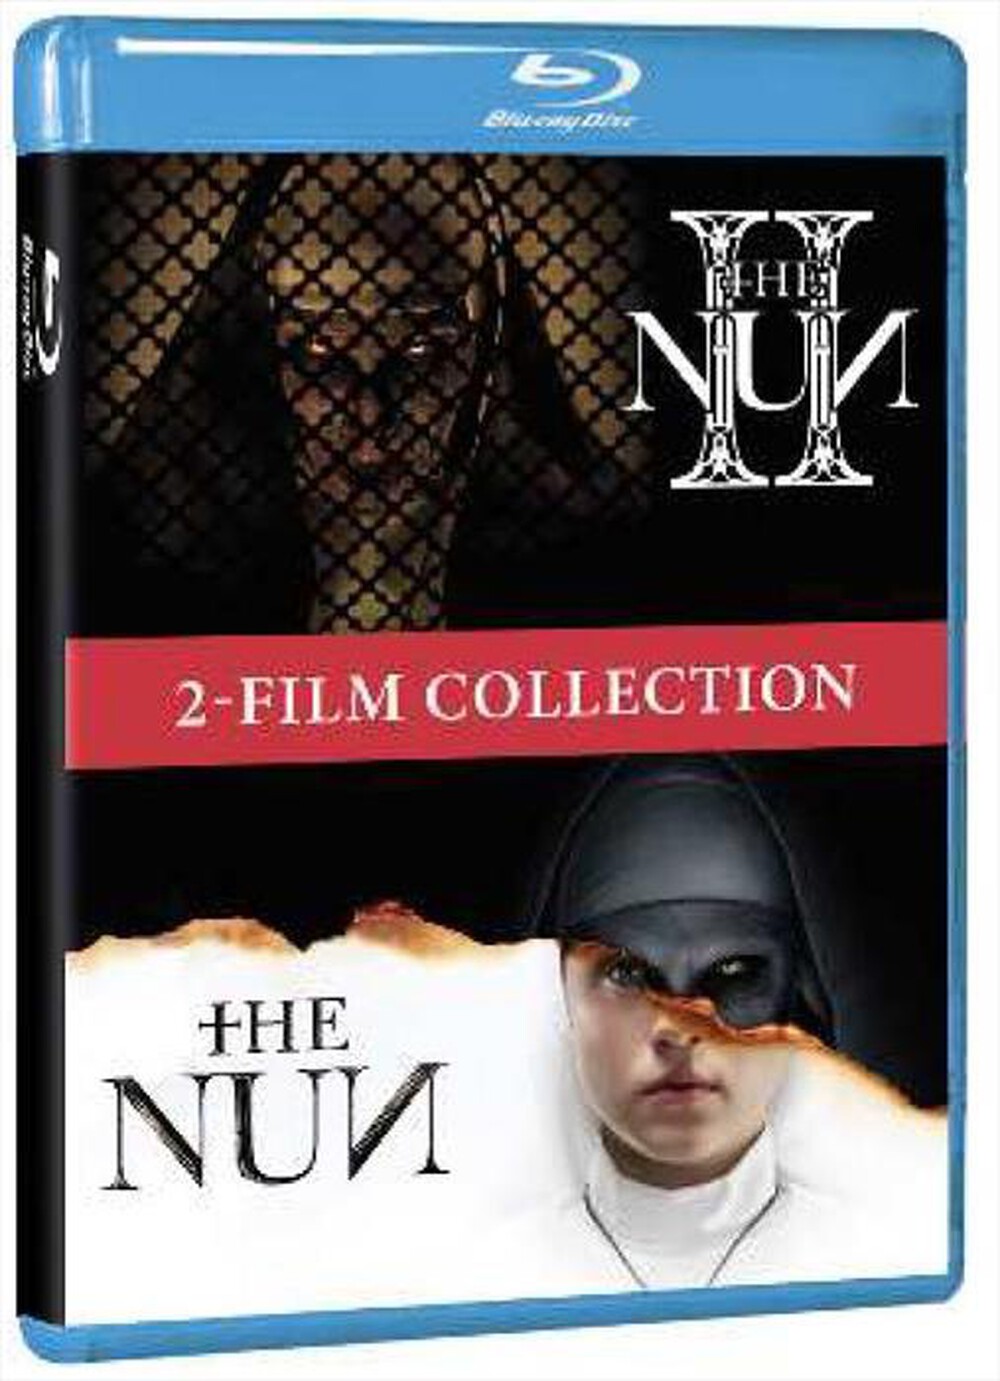 "WARNER HOME VIDEO - Nun (The) - 2 Film Collection (2 Blu-Ray)"